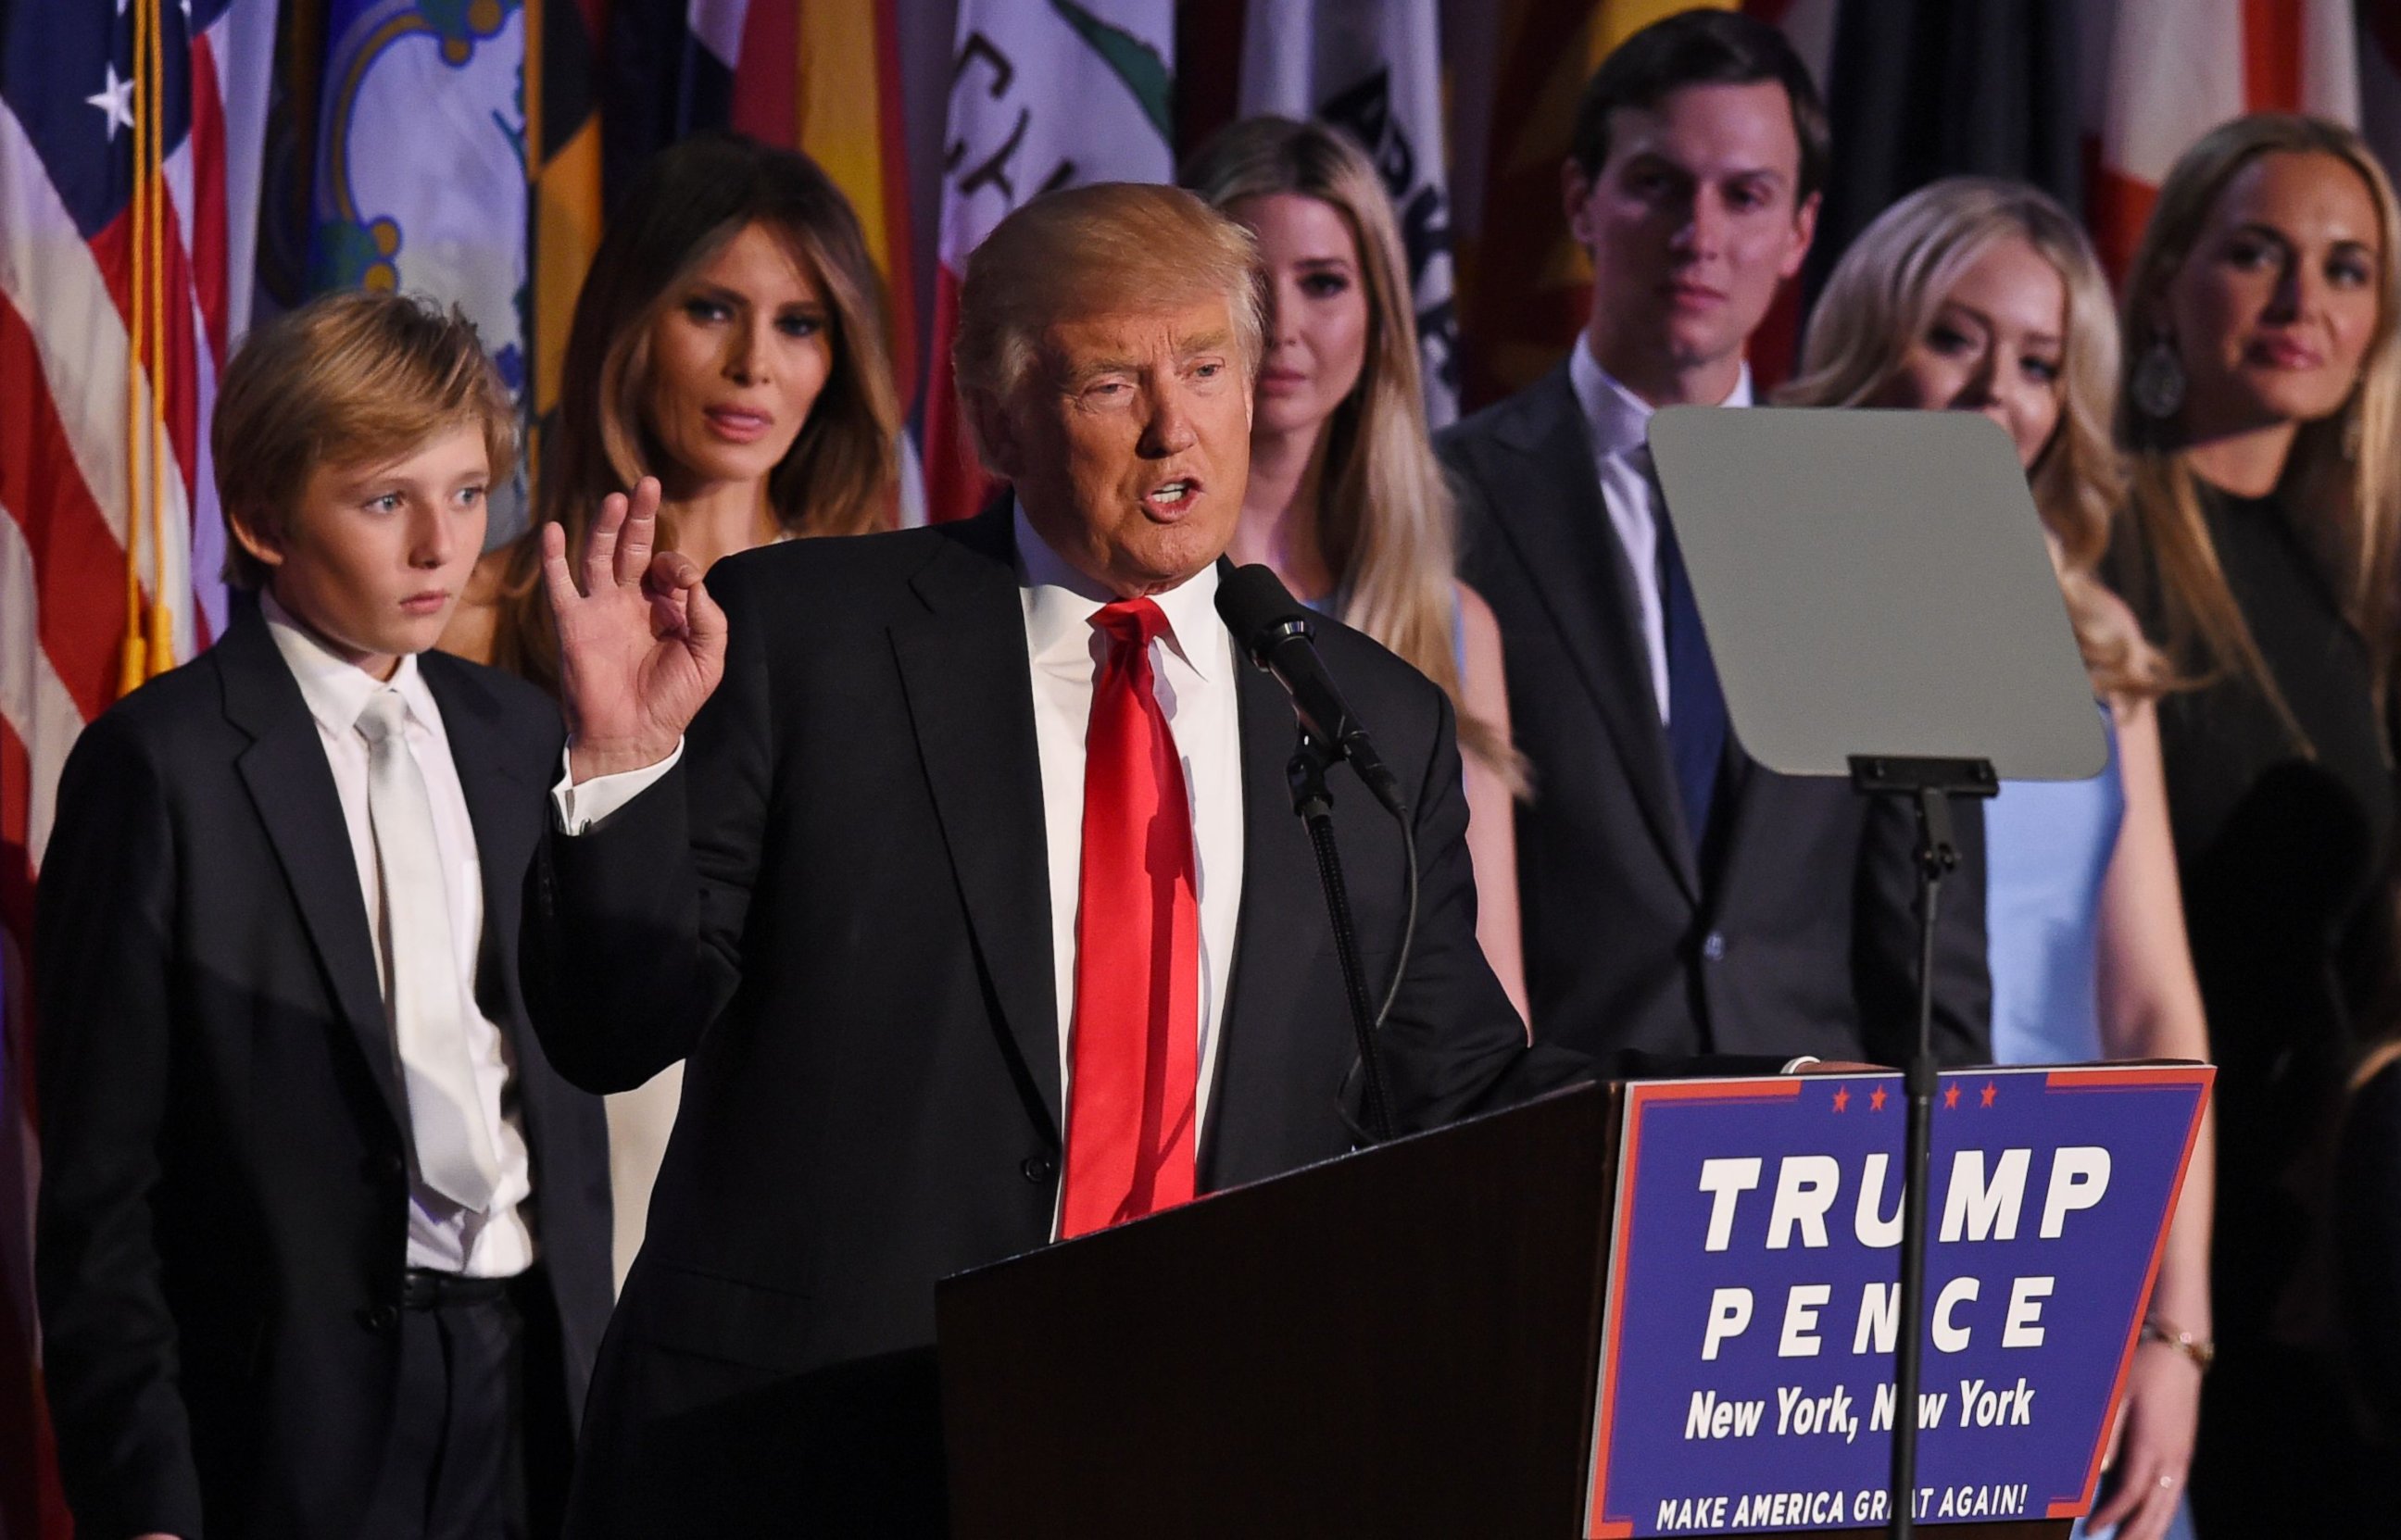 PHOTO: Republican presidential nominee Donald Trump arrives on stage with his family to speak to supporters during election night at the New York Hilton Midtown in New York on Nov. 9, 2016. 
